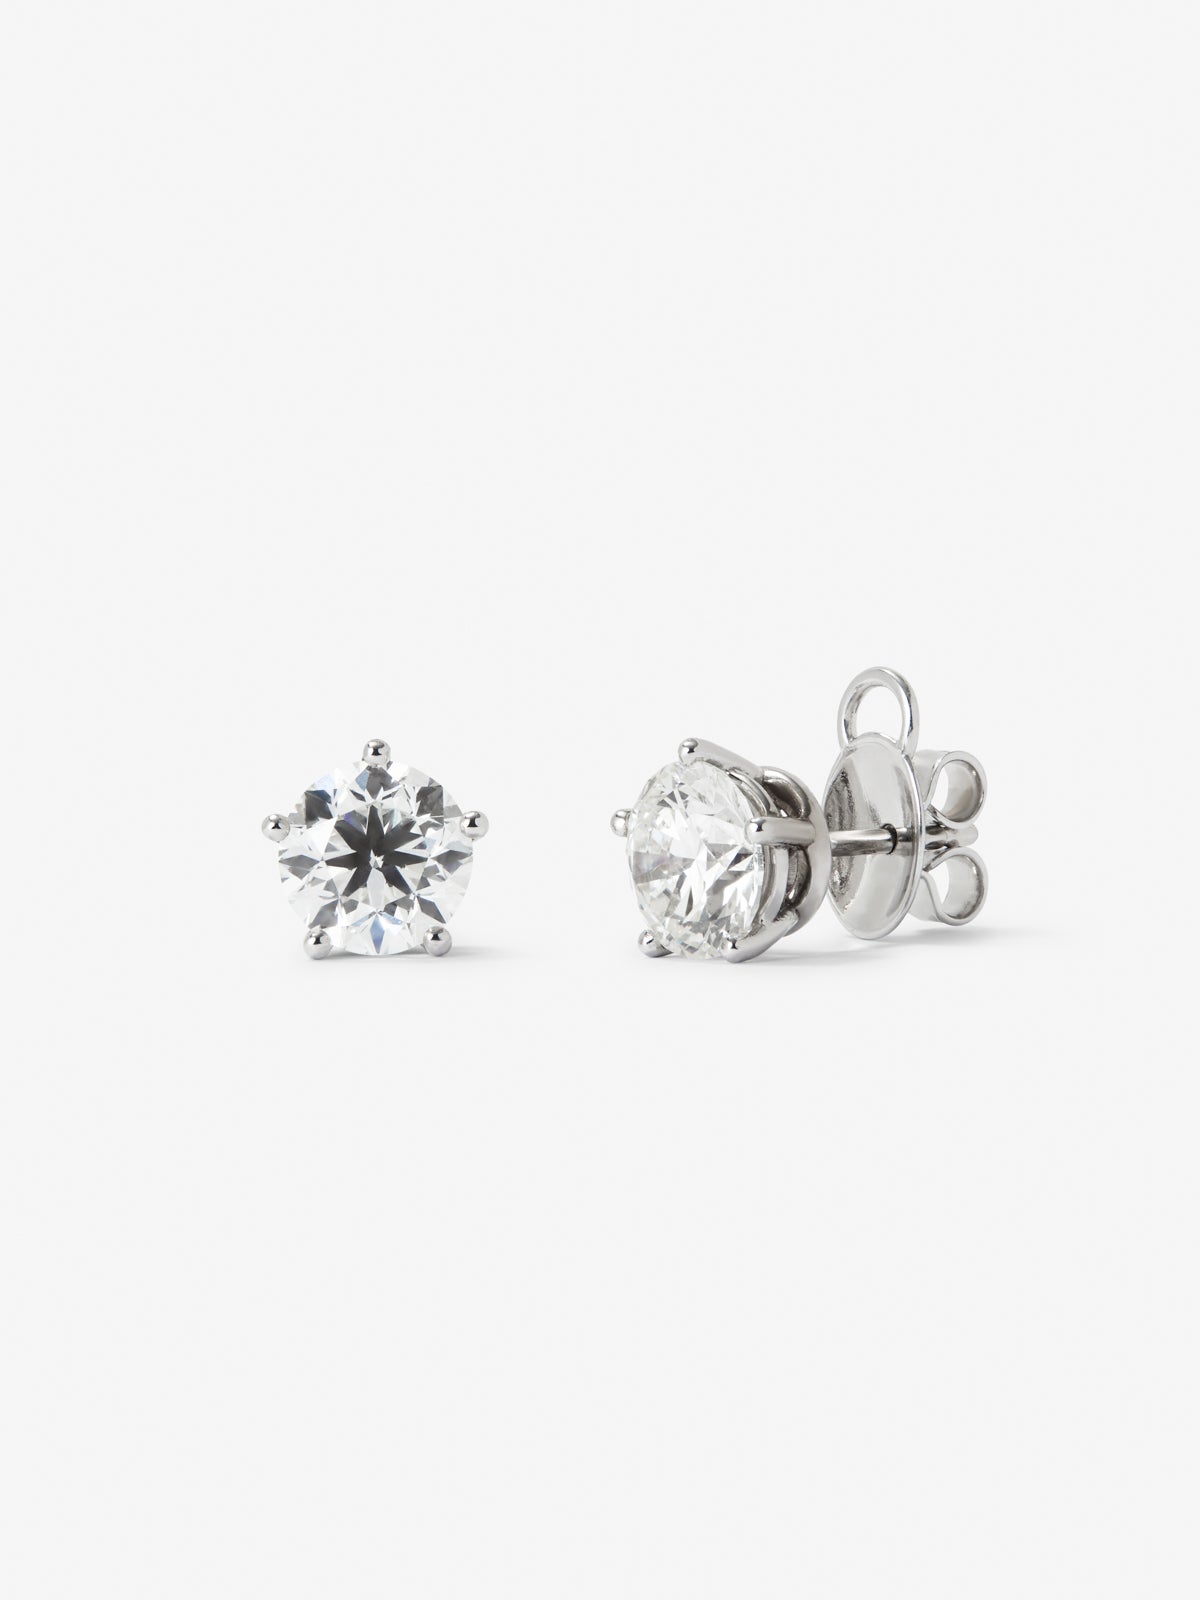 18K white gold earrings with 2 brilliant-cut diamonds with a total of 4 cts